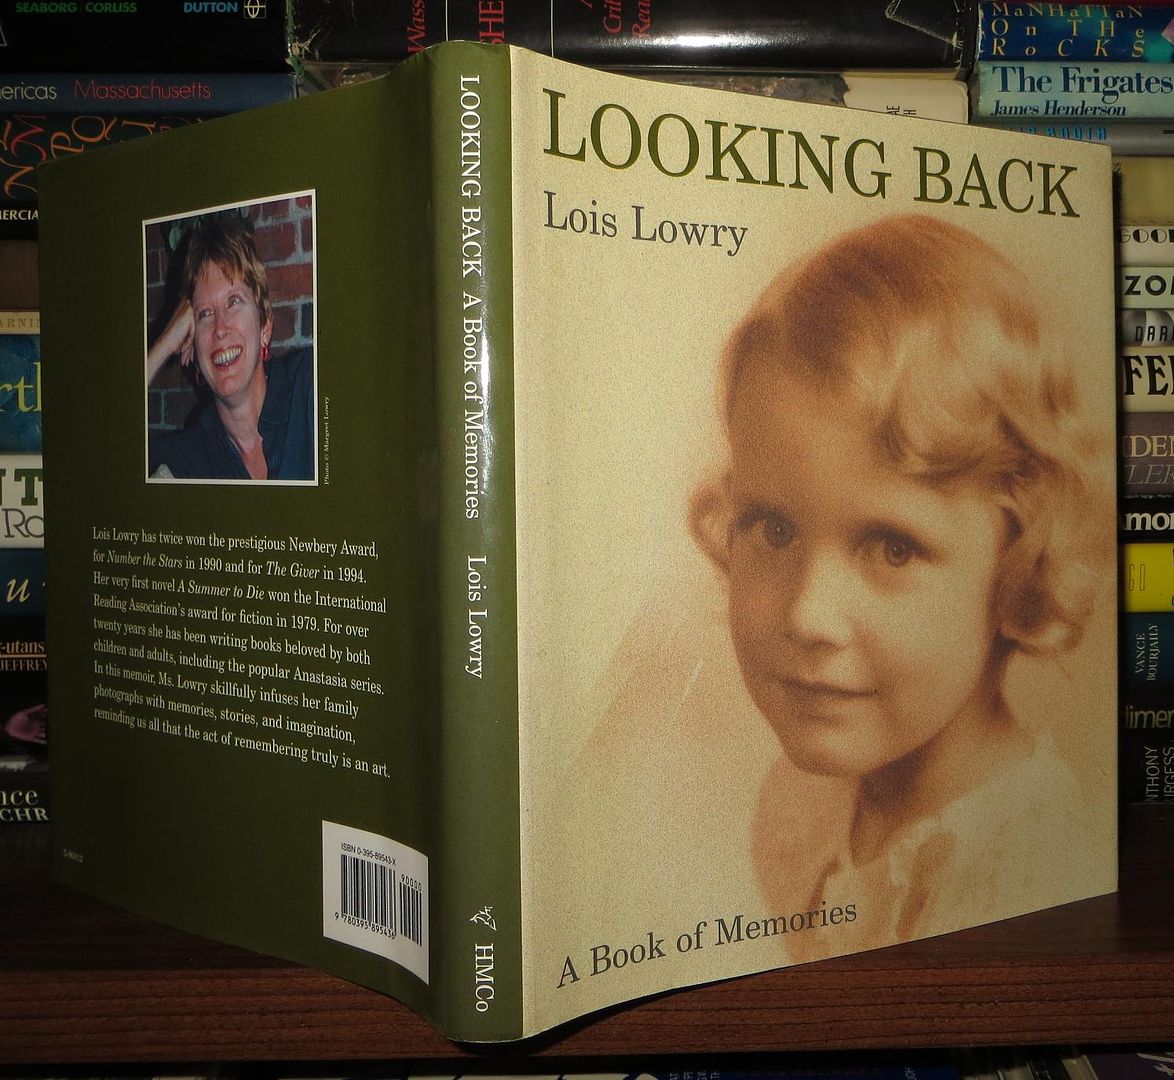 LOIS LOWRY - Looking Back a Book of Memories